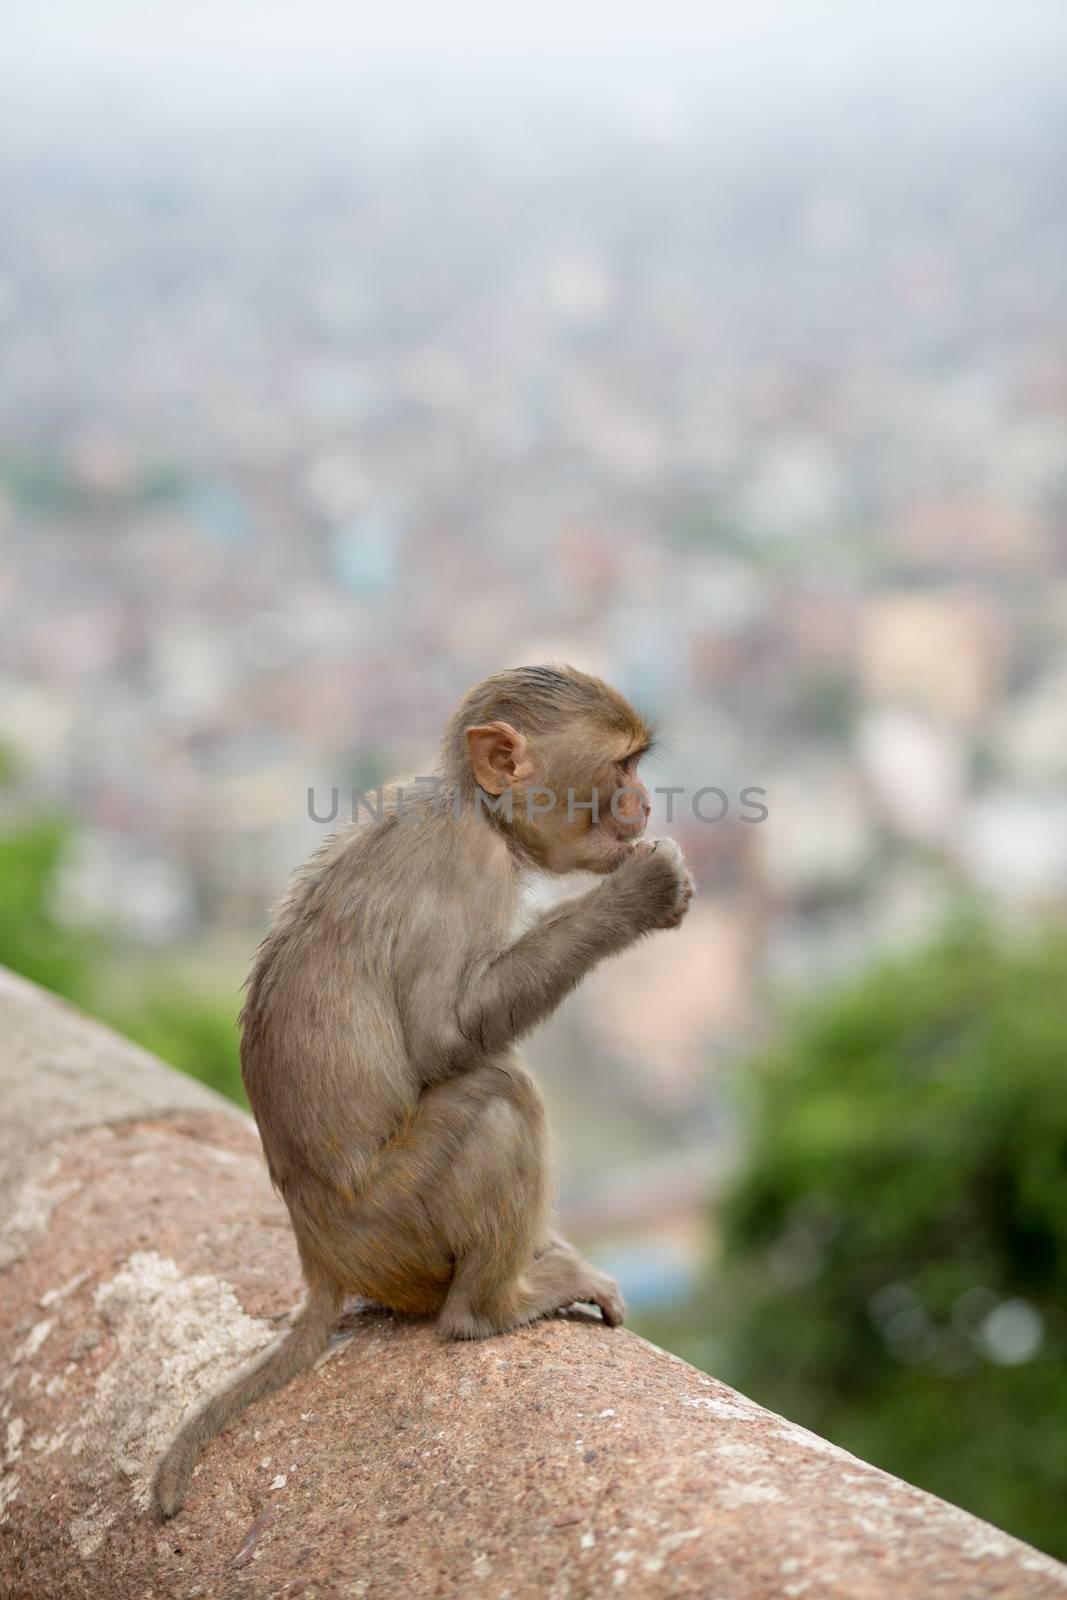 A baby monkey sitting at Swayambhunath temple with kathmandu blurred in the background